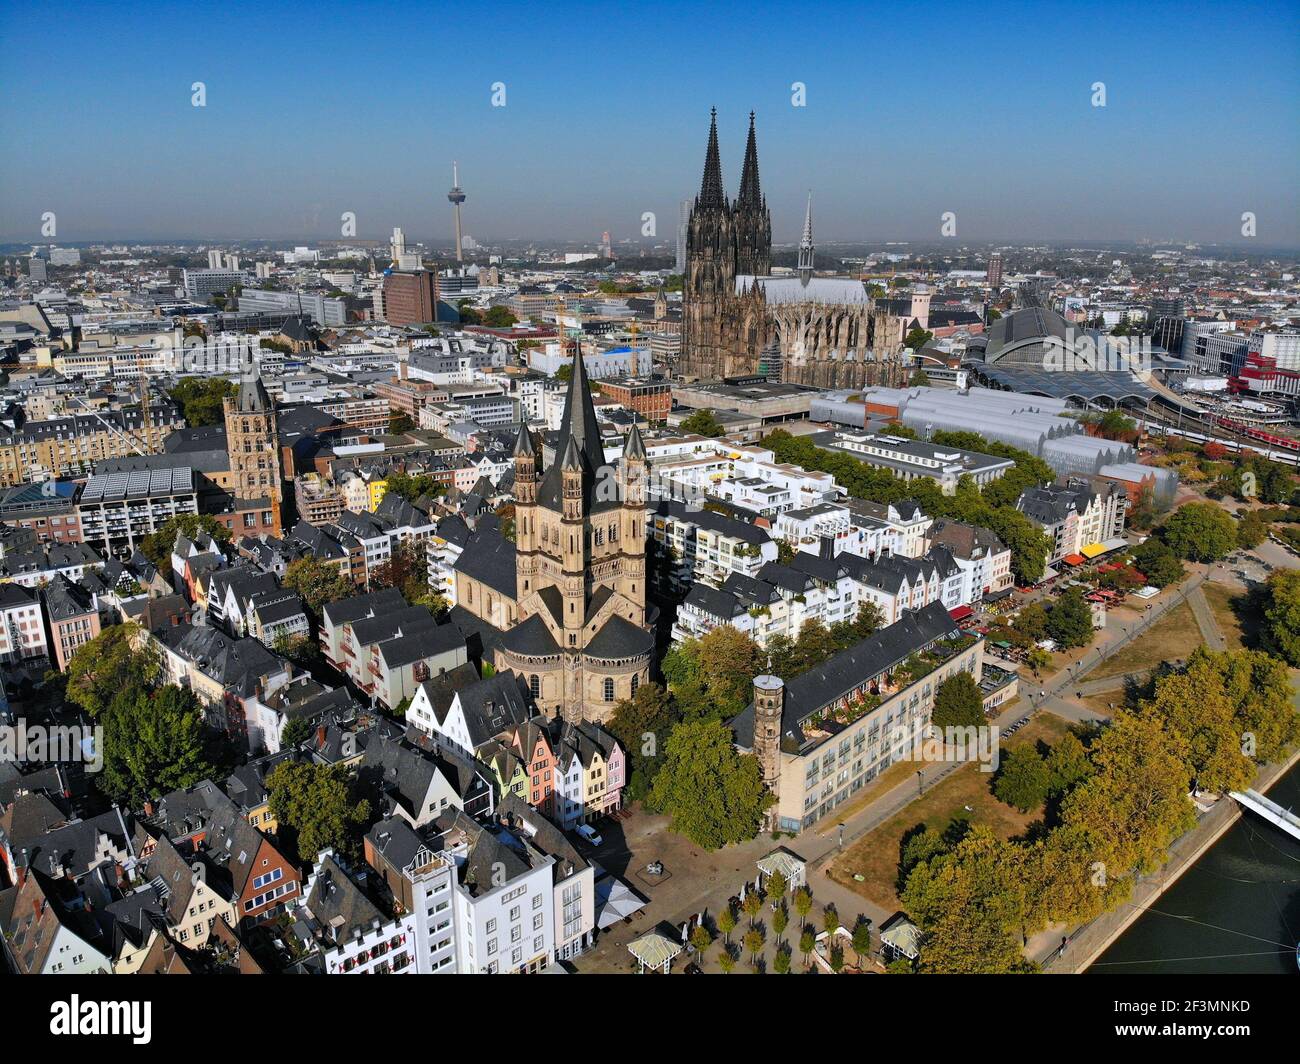 Cologne city, Germany. Aerial view of Innenstadt part of Altstadt district, Cologne city. Stock Photo